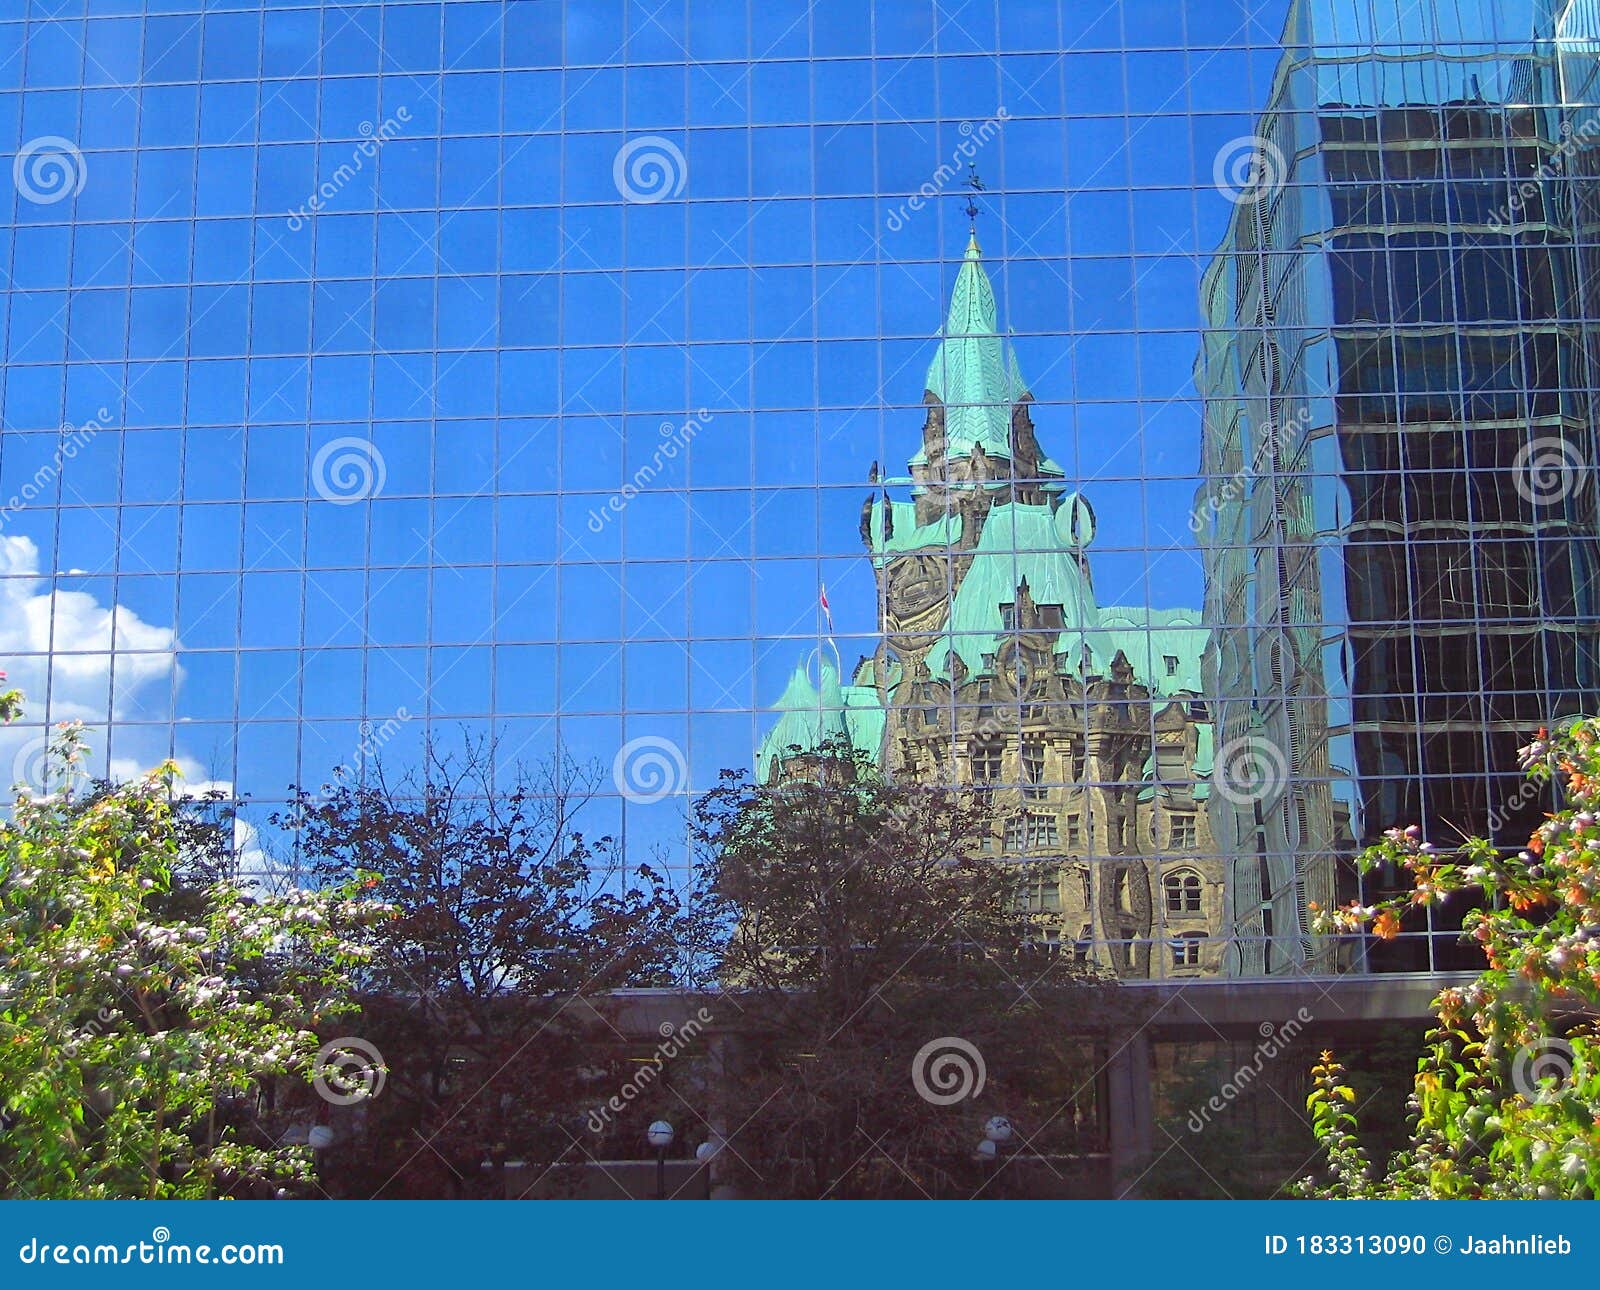 ottawa, ontario, dominion building reflected in glass fascade of bank of canada building